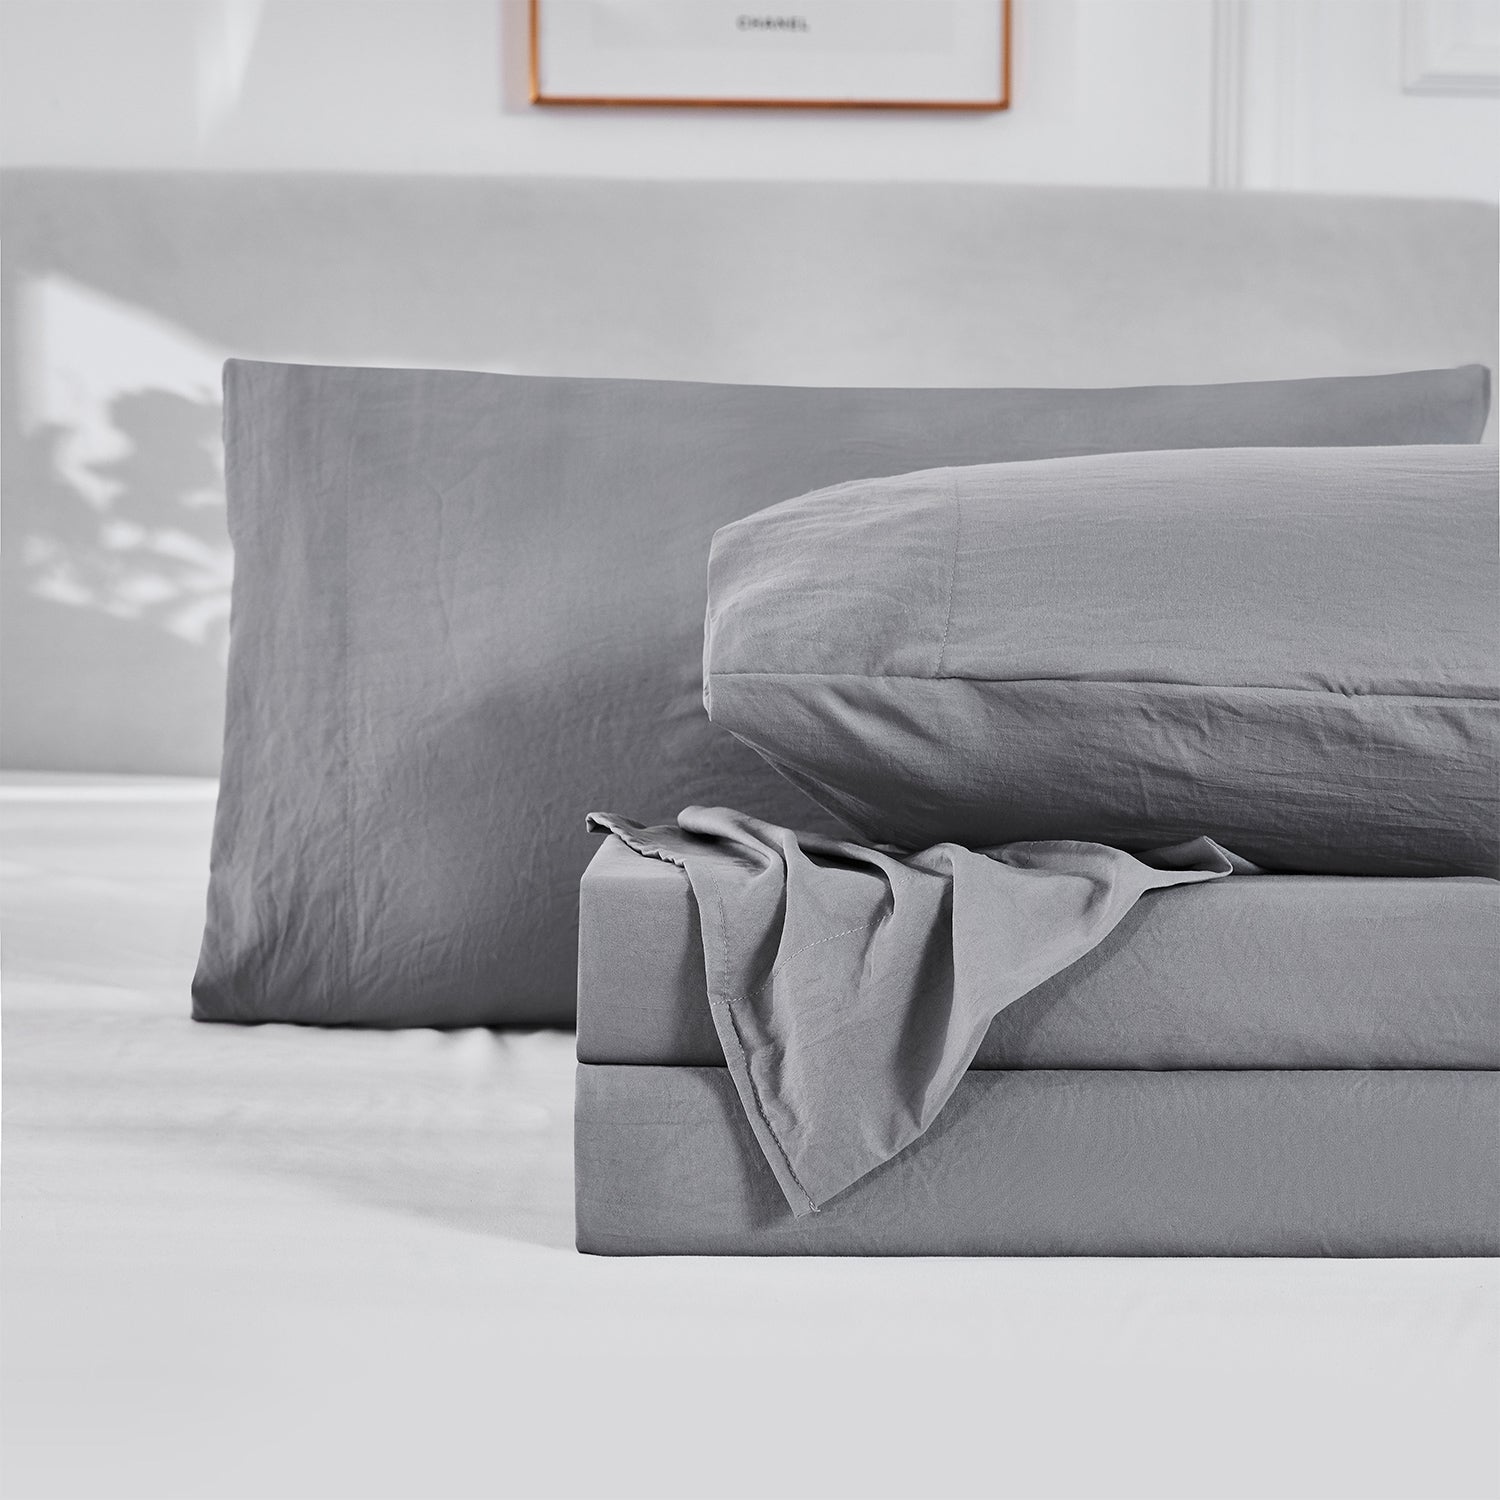 SOLID GRAY 4PC BEDDING SHEET SET - BREATHABLE AND COOLING SHEETS - HOTEL LUXURY - EXTRA SOFT - WRINKLE, FADE, STAIN RESISTANCE